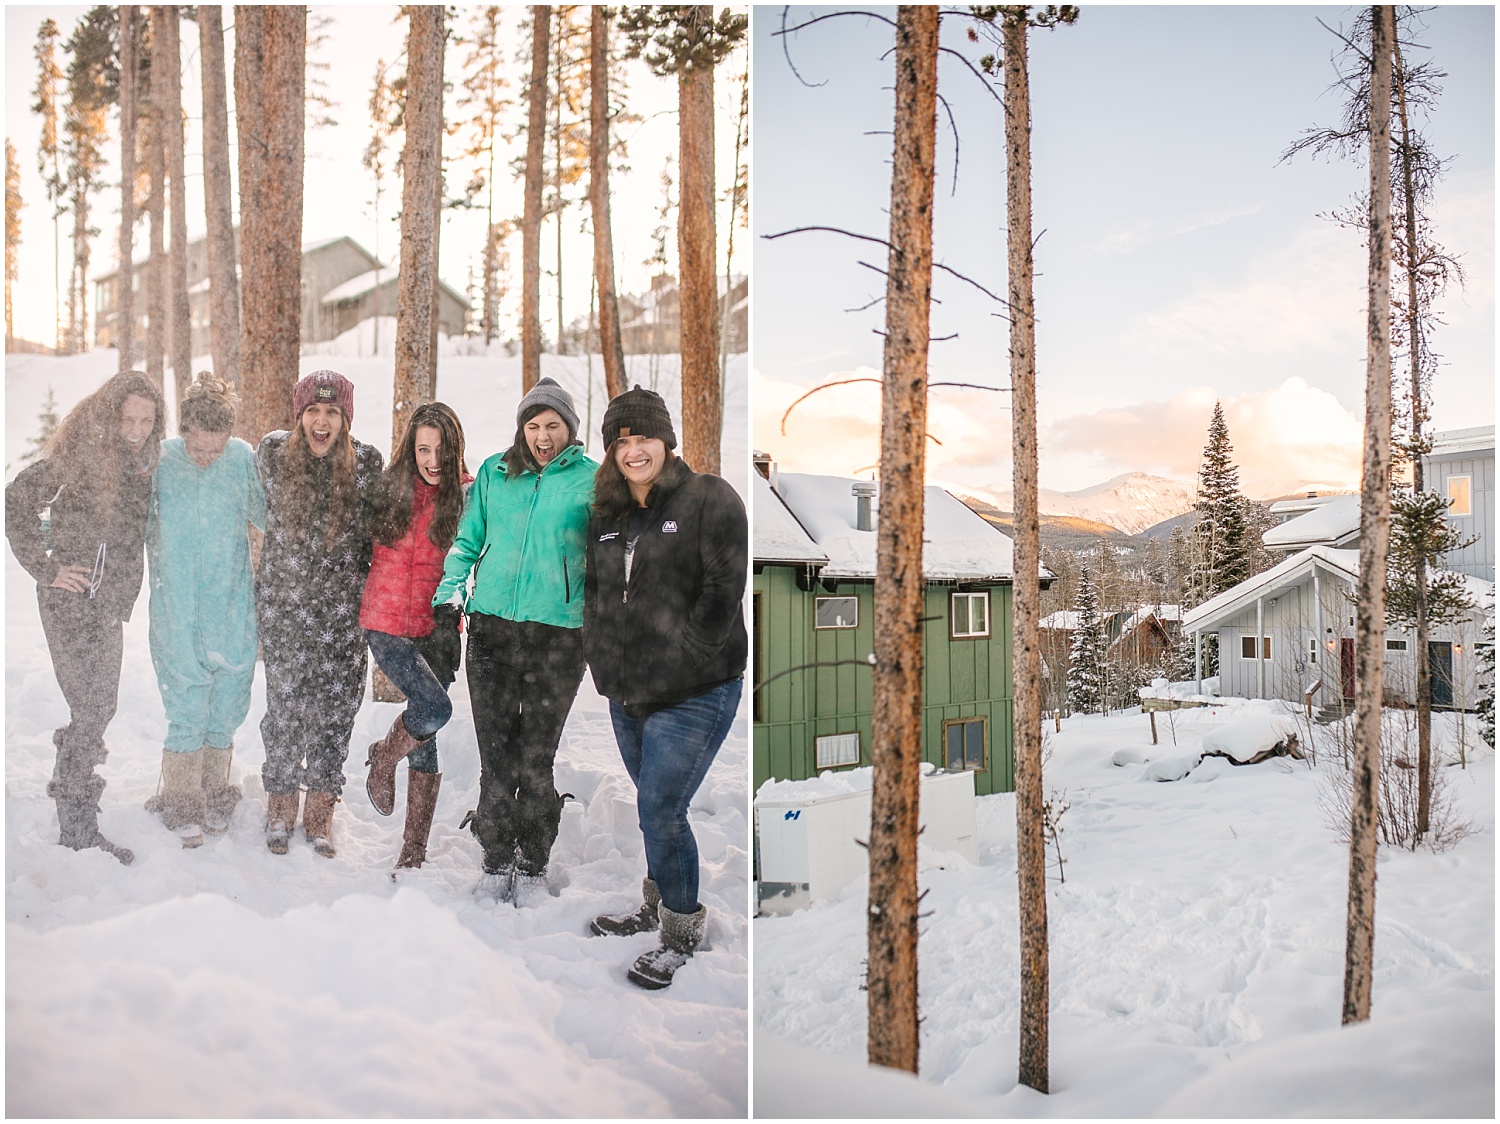 Friends celebrating surprise proposal engagement party in the snow at Winter Park, Colorado